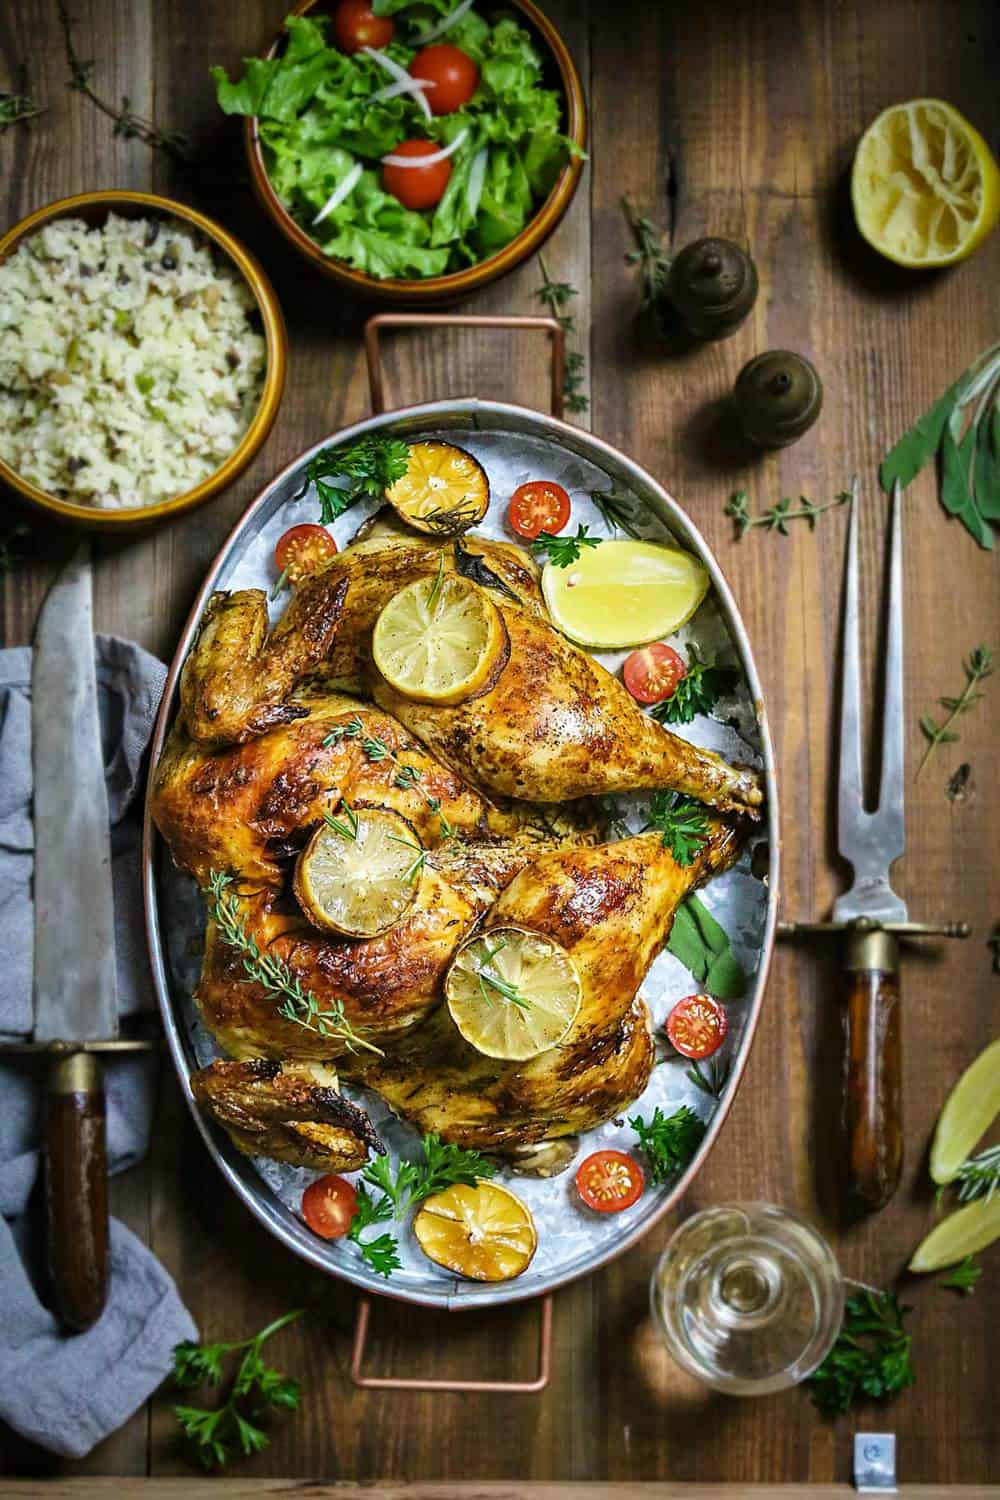 An oval dish with roasted whole chicken with lemon slices and fresh herbs sitting on a wooden table with cutlery and side dishes.